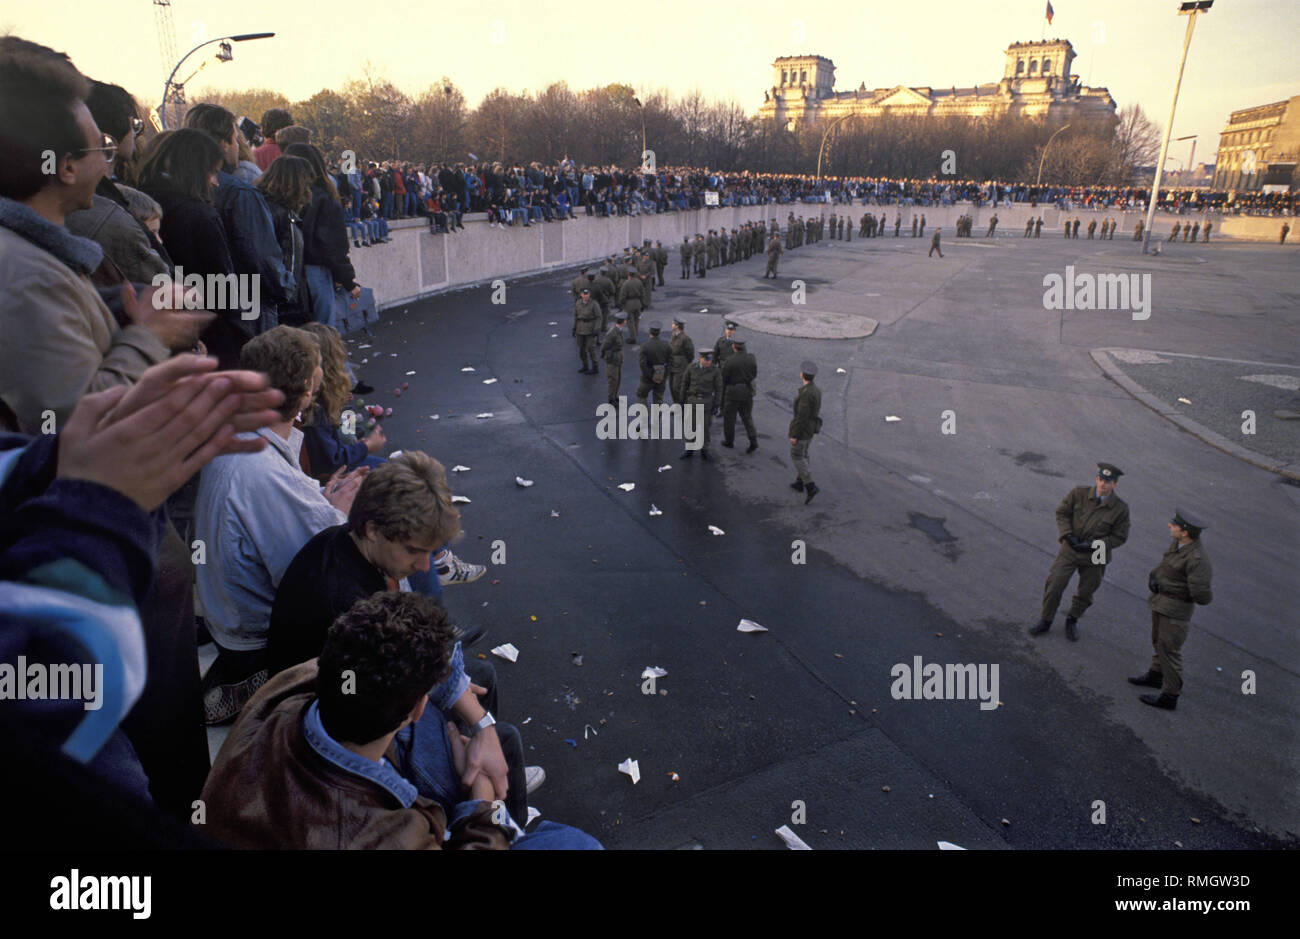 Thousands of residents of East and West Berlin celebrate the opening of the border on the Berlin Wall at the Brandenburg Gate. GDR frontier guards prevent people from entering the restricted area at the square in front of the Brandenburg Gate and Pariser Platz. Stock Photo